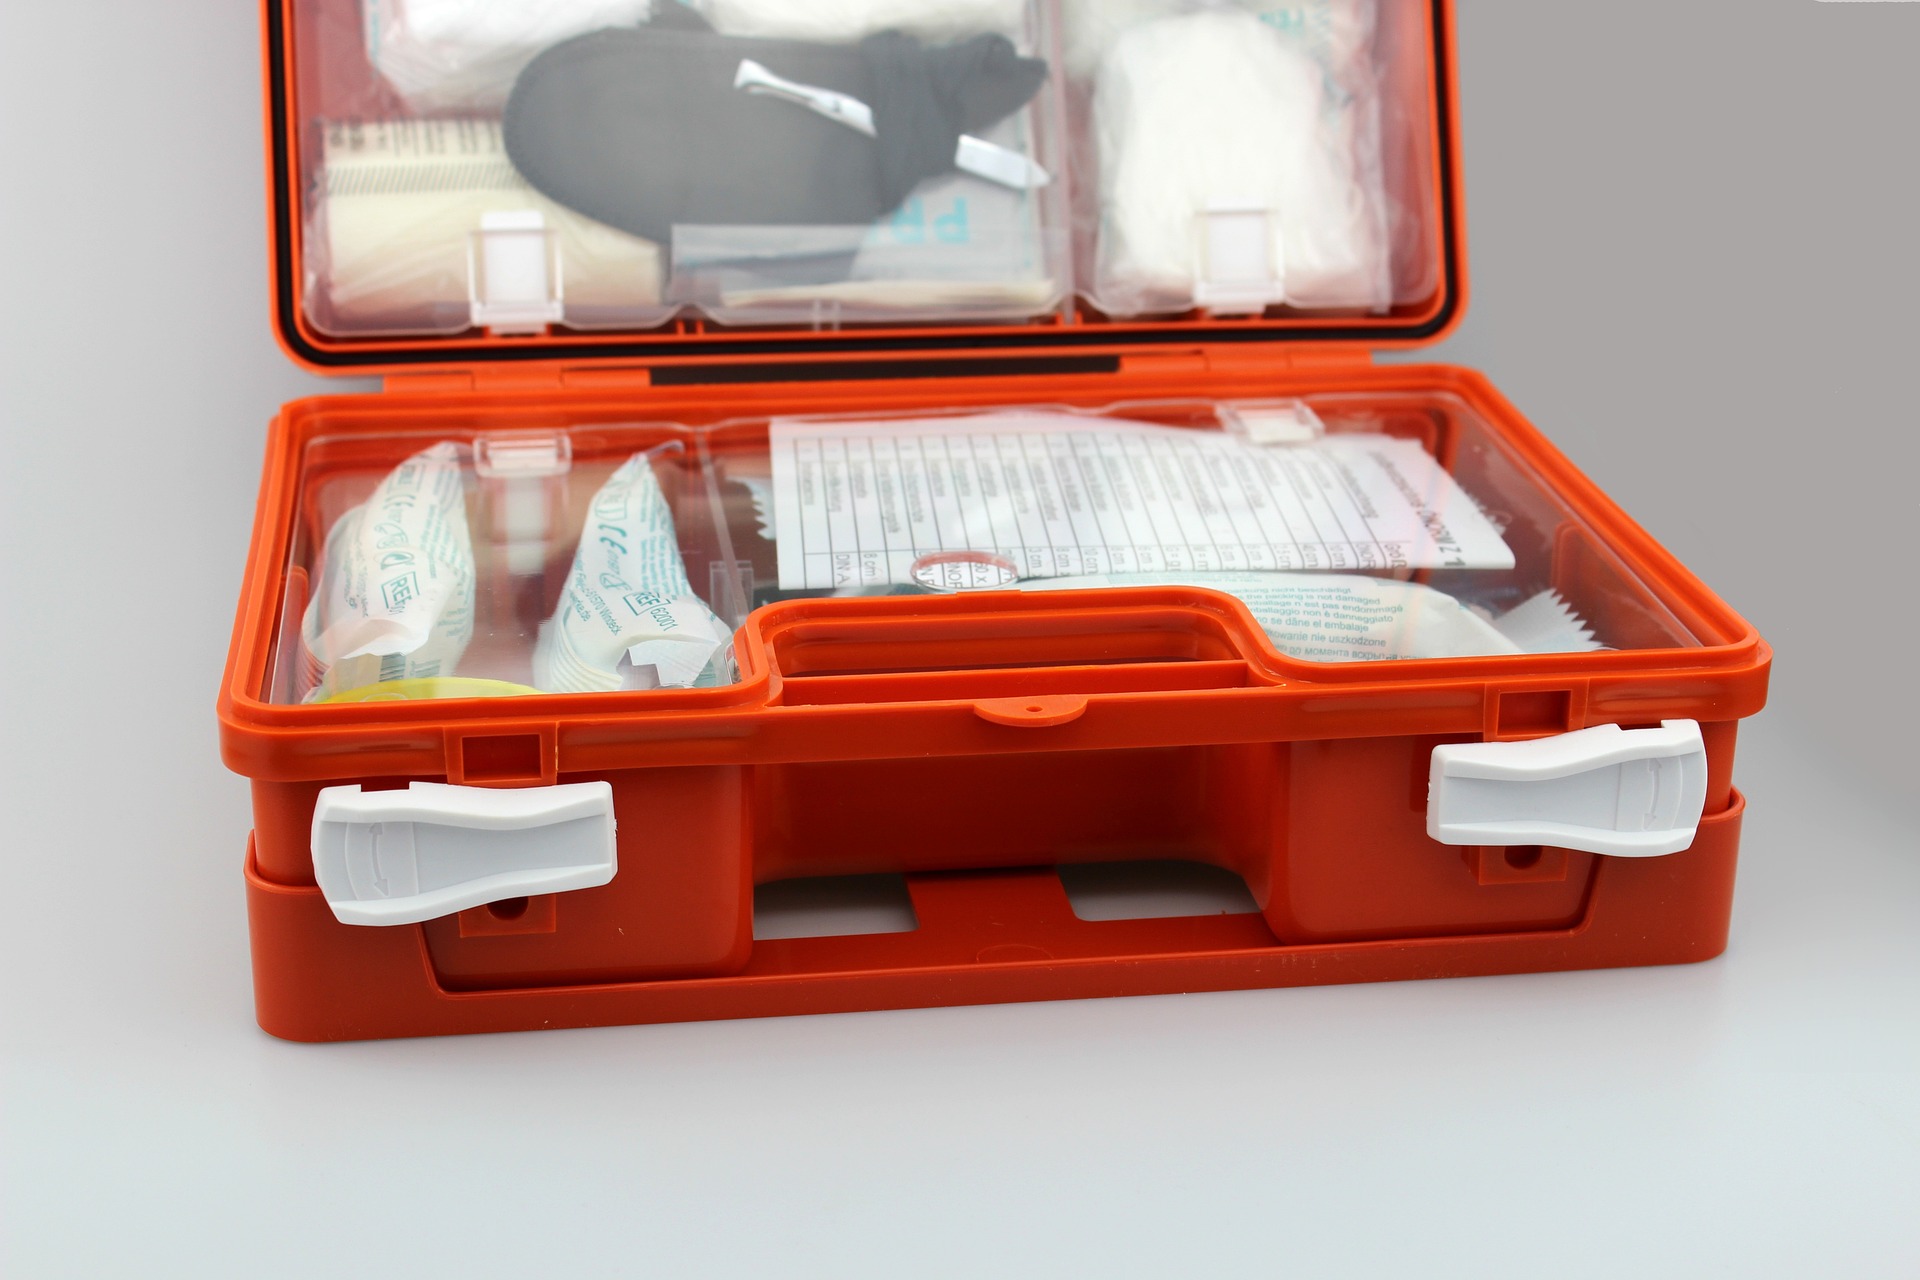 8 Items Every Driver Should Have in a Car First Aid Kit - Porsche Warwick  Blog